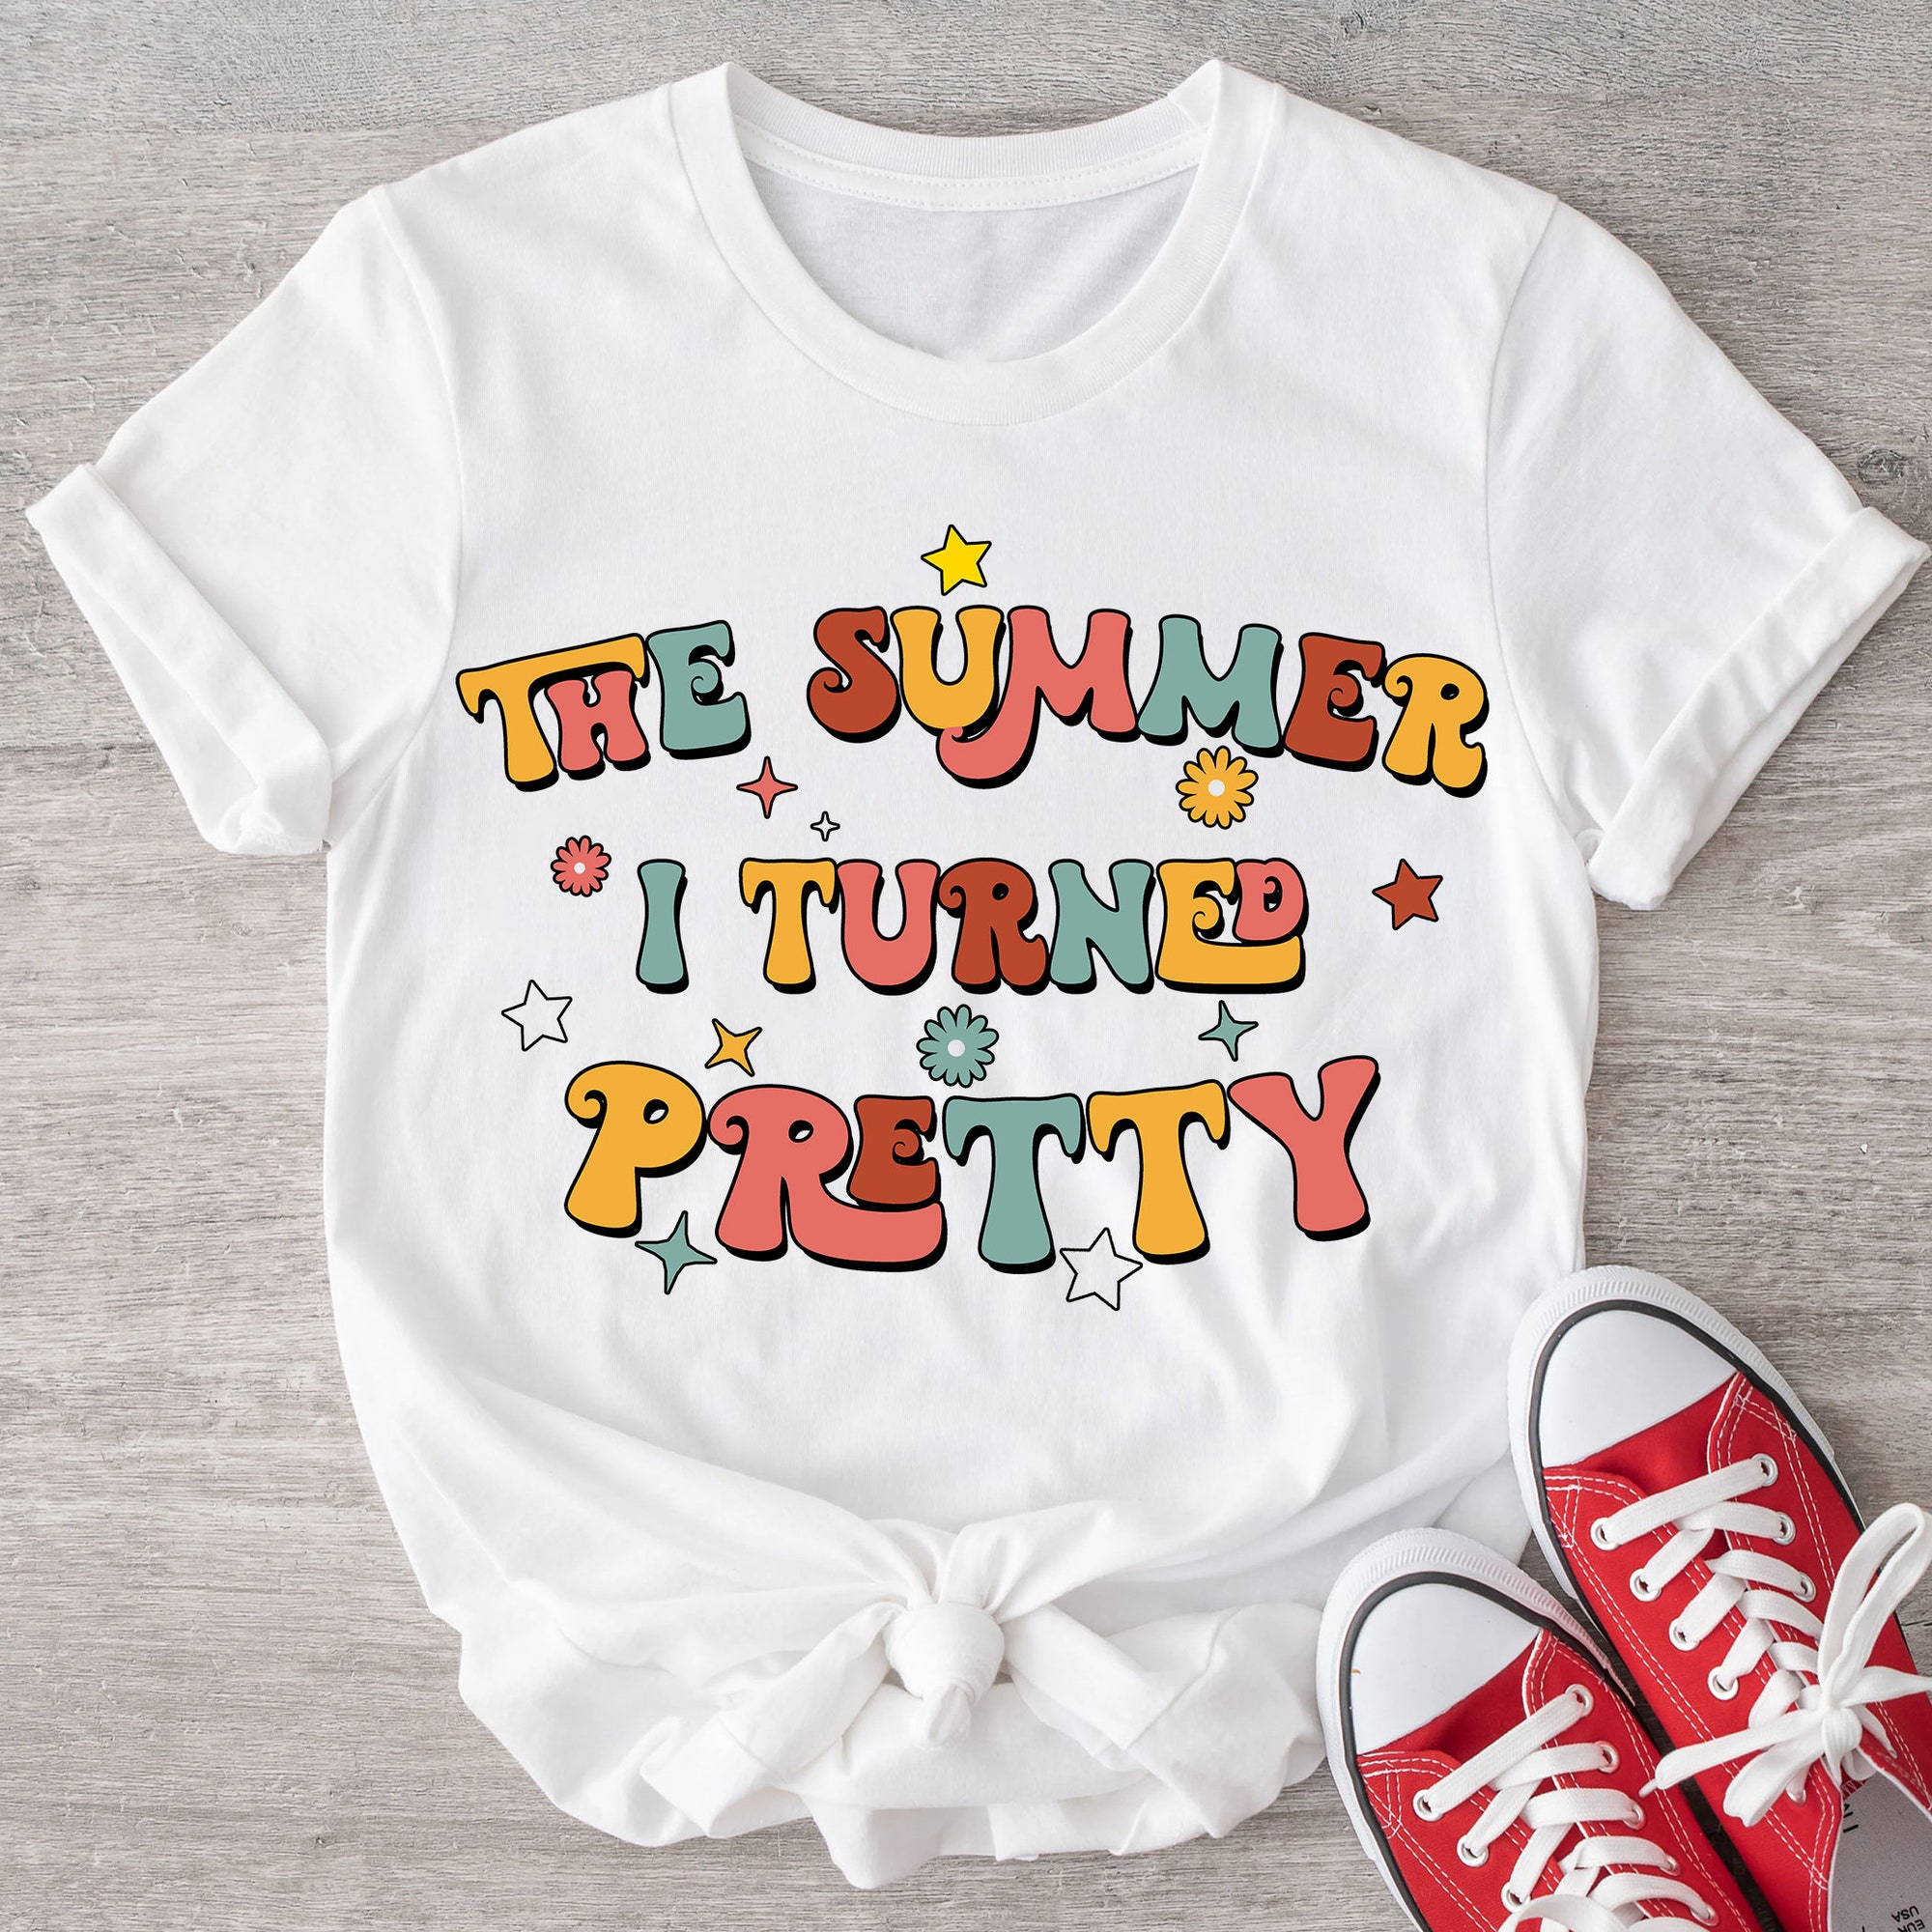 Discover The Summer I Turned Pretty T-Shirt